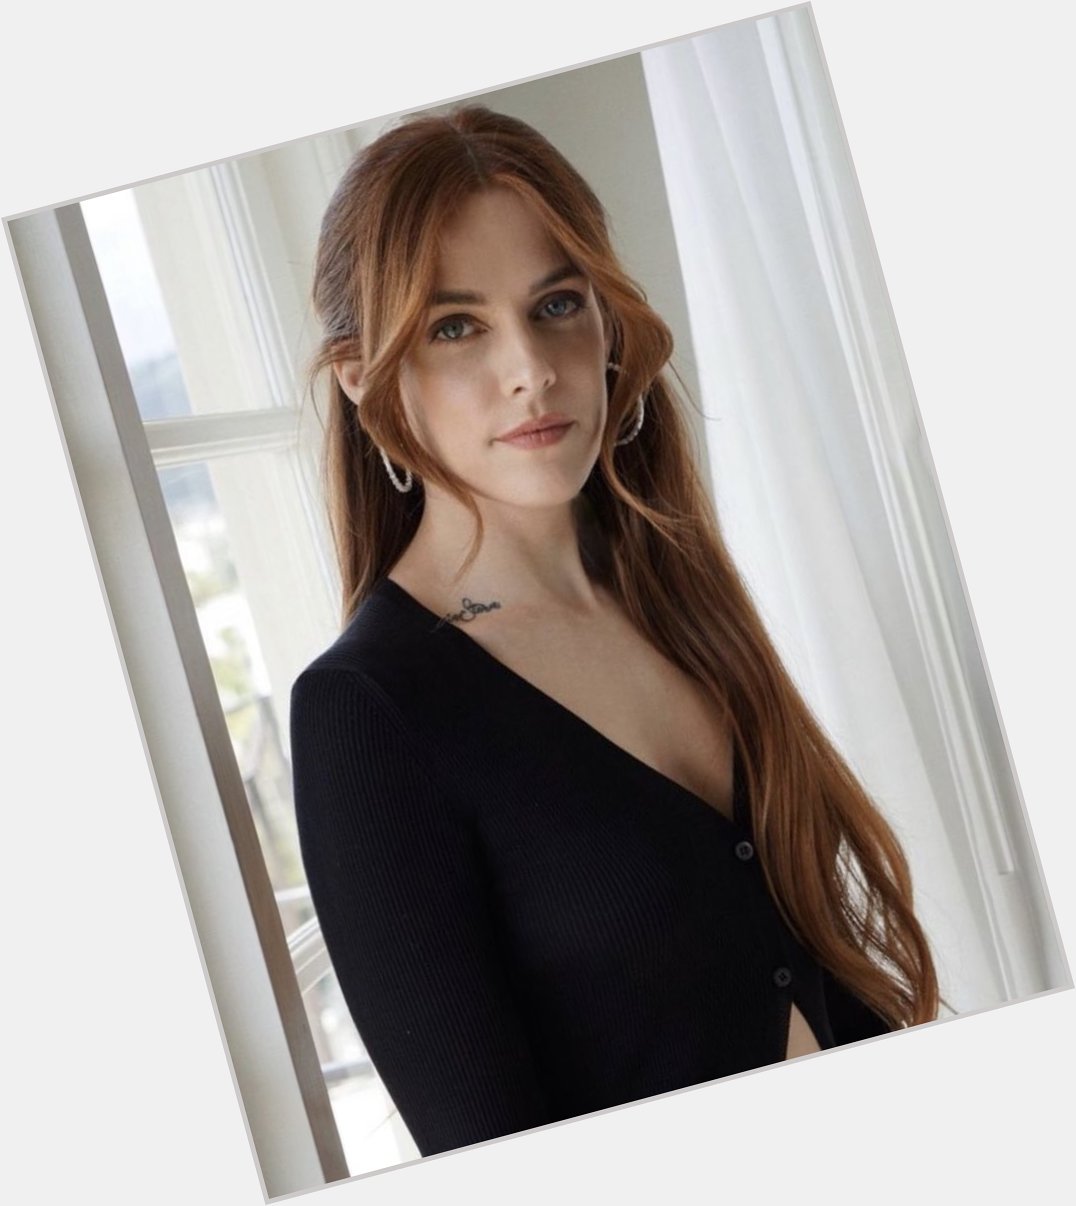 Happy birthday to our daisy jones, riley keough! i love you   